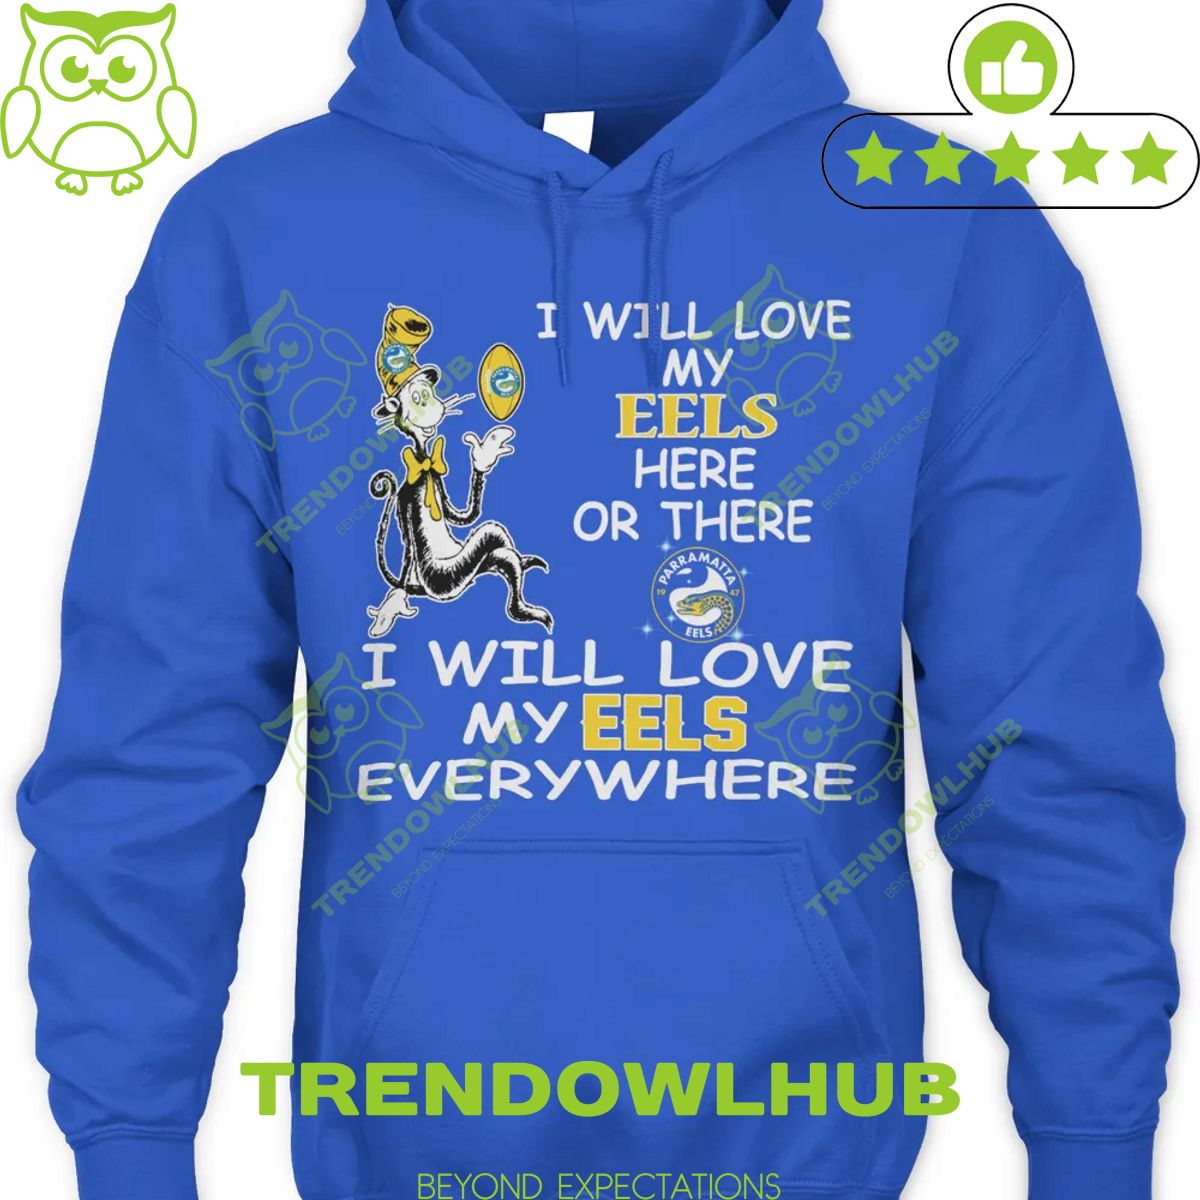 Parramatta Eels I will love my Eels here or there everywhere Eels t shirt for NRL fans